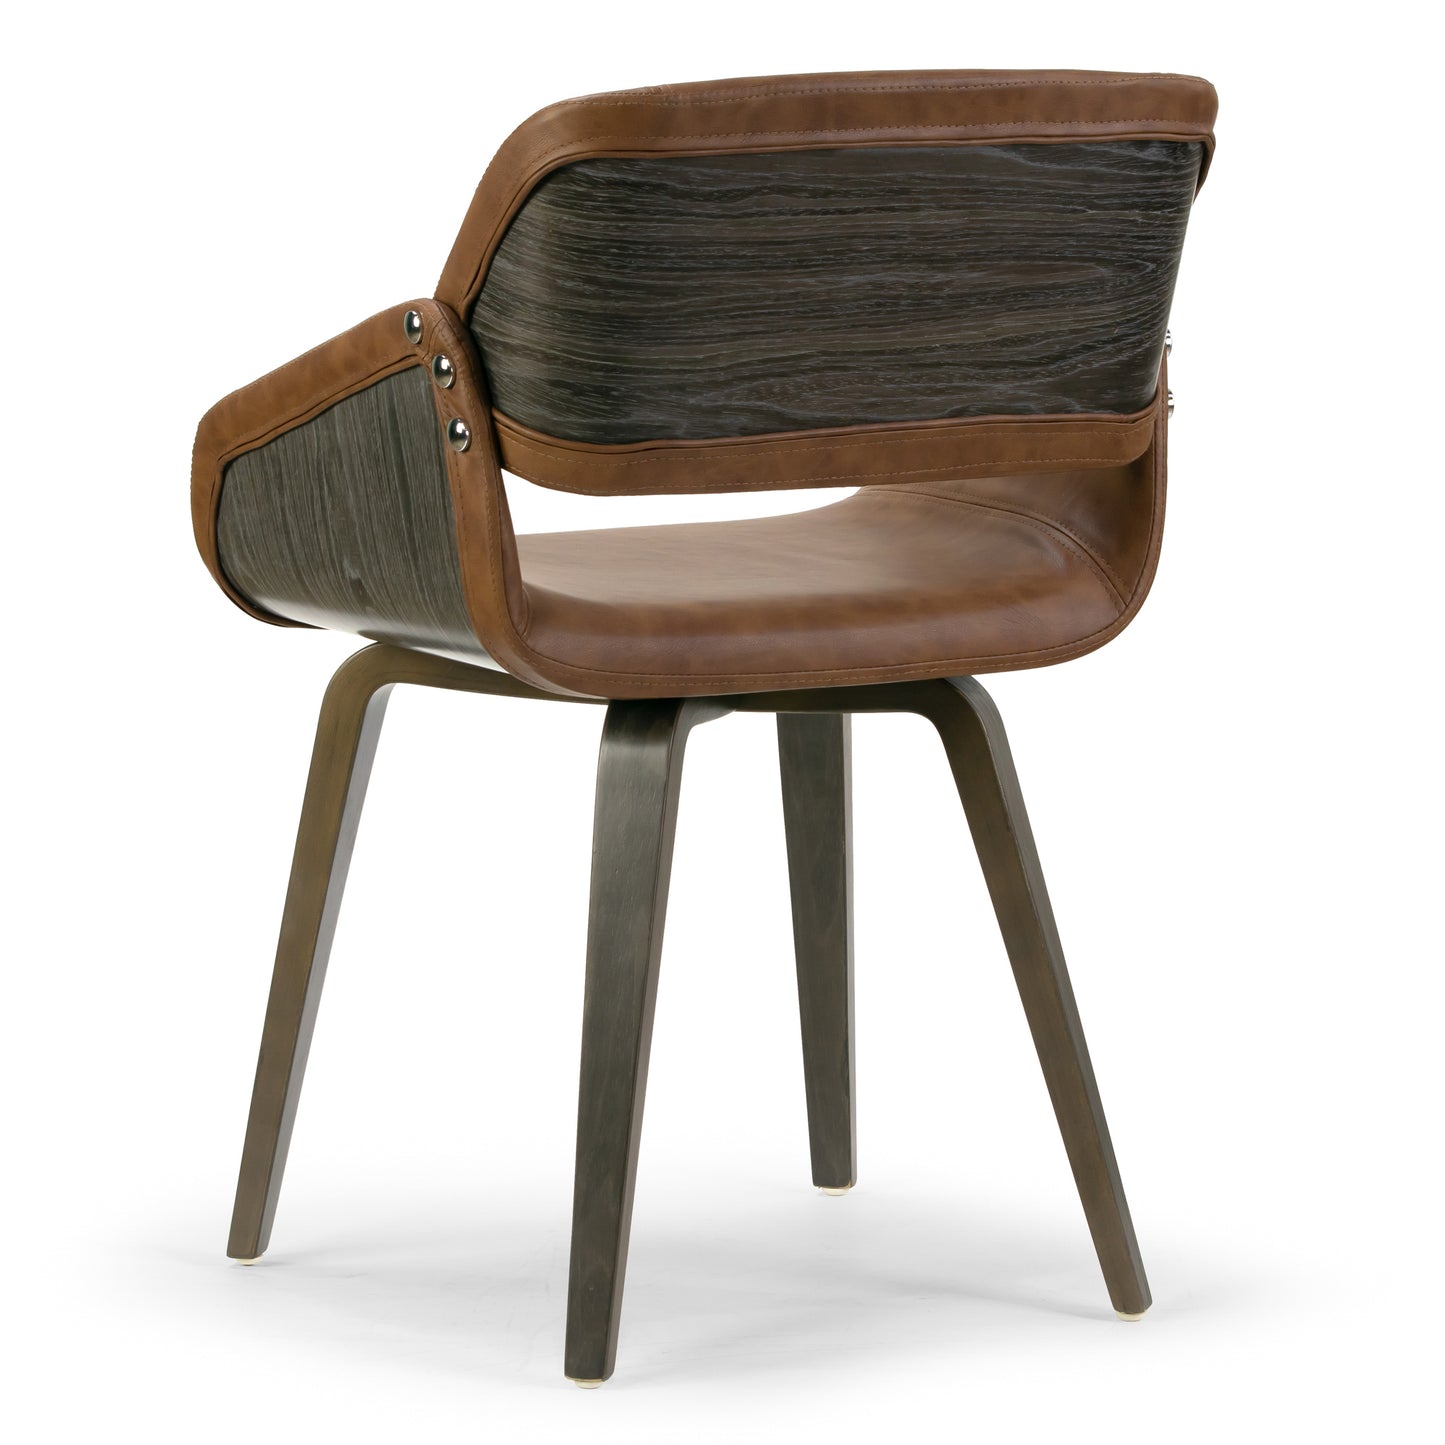 Amal Brown Upholstered Dining Chair with Grey Wood Accent and Bentwood Legs